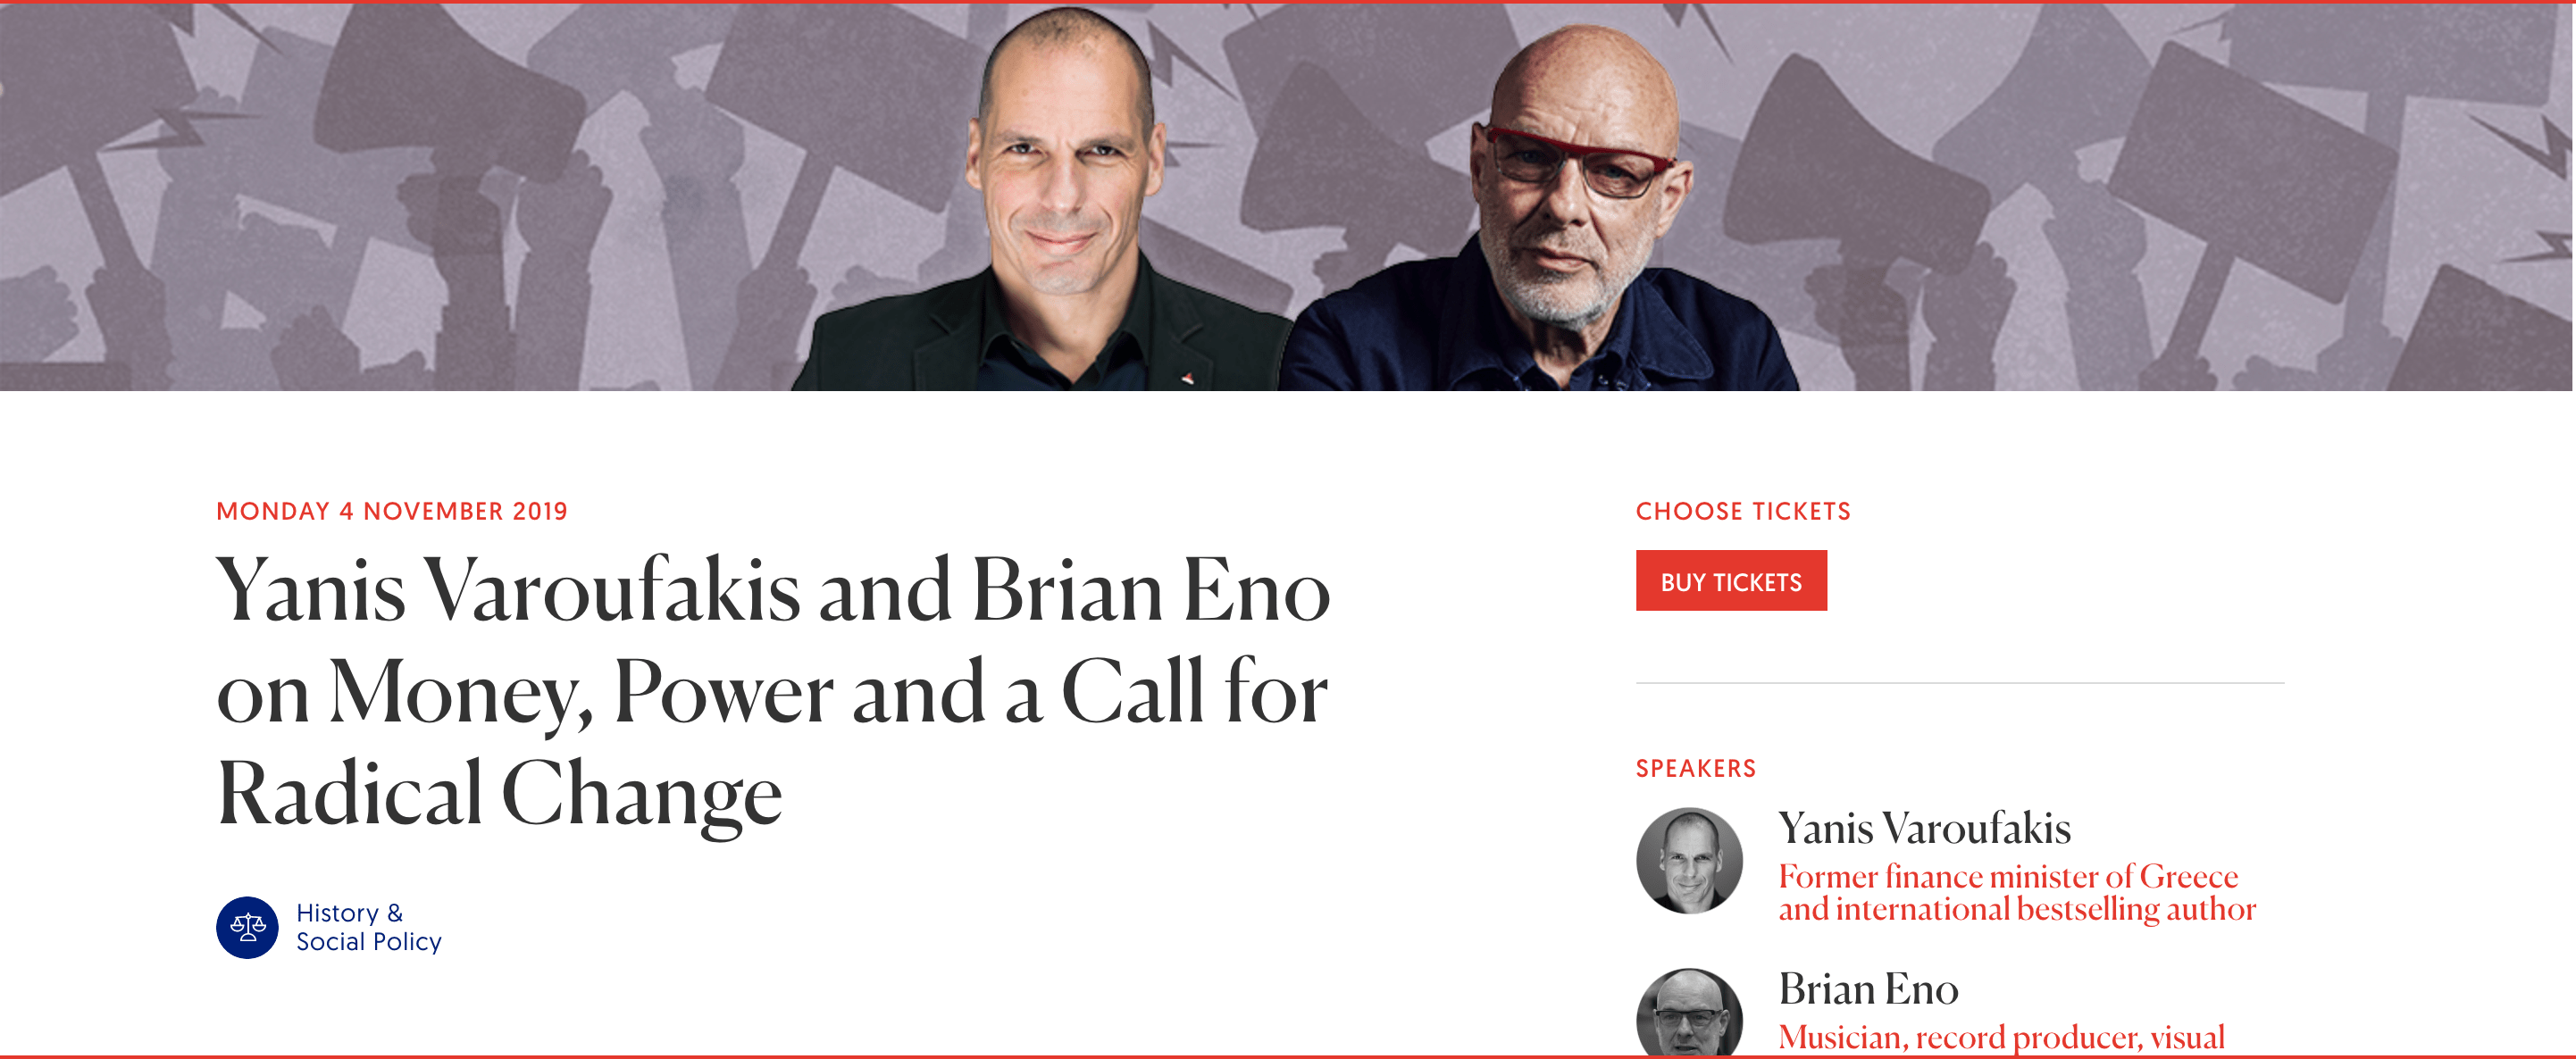 IQ Squared presents Yanis Varoufakis and Brian Eno on Money, Power and a Call for Radical Change – London, 4th November